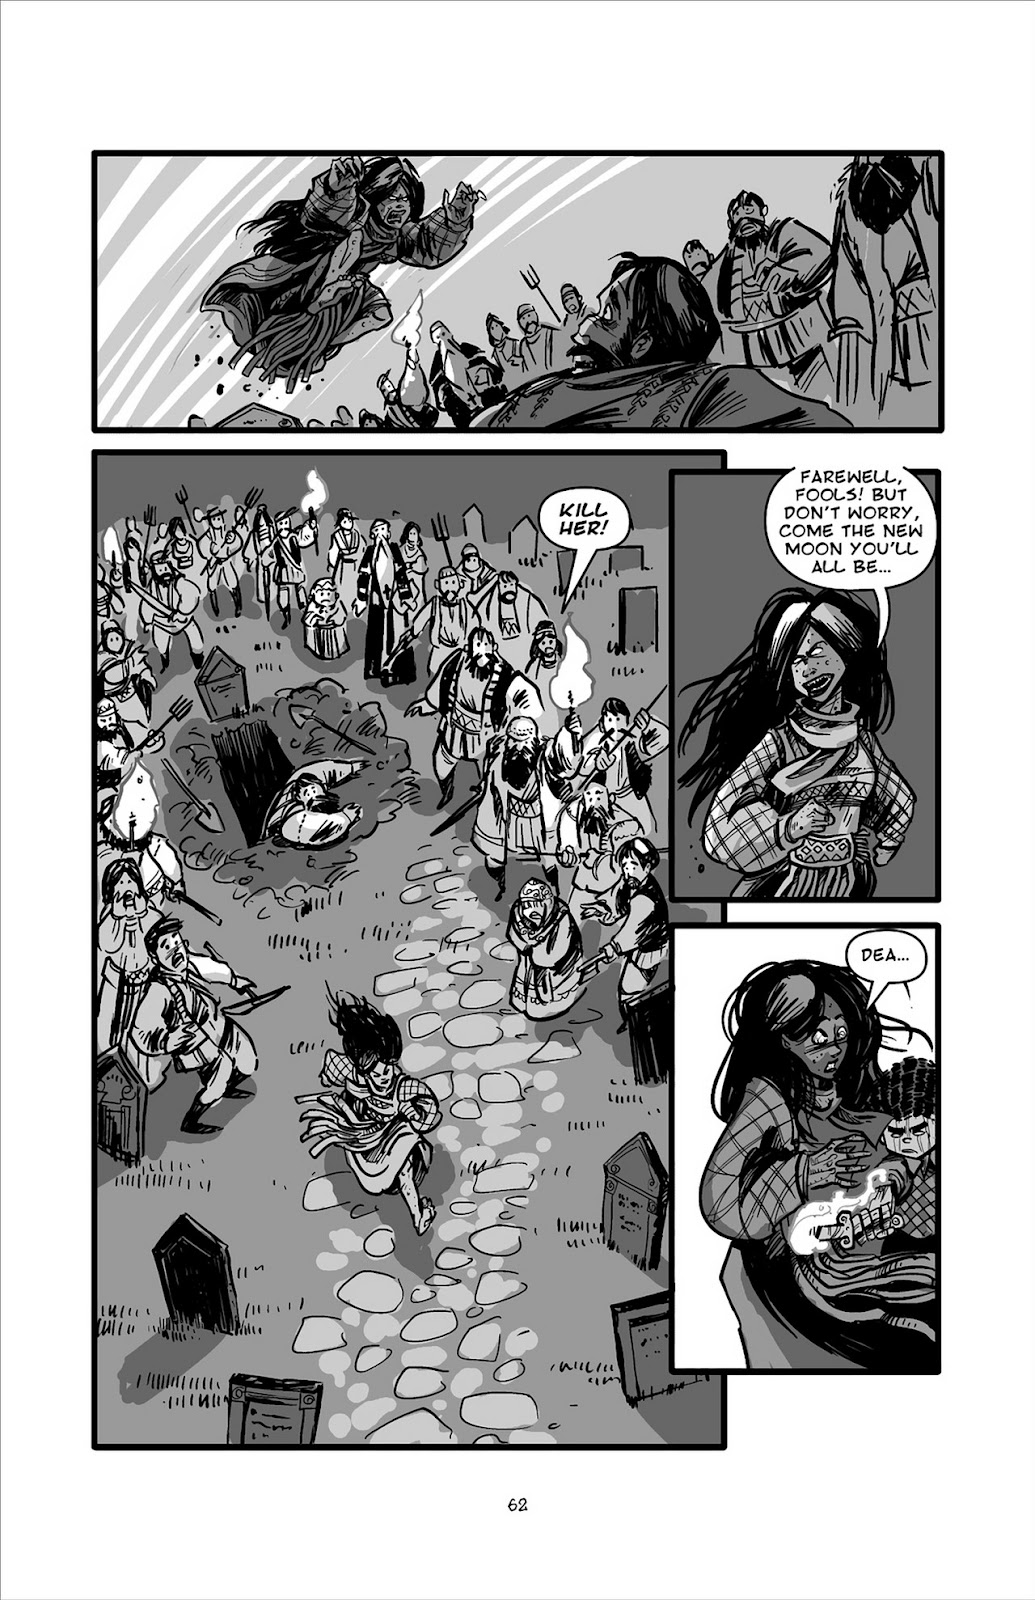 Pinocchio: Vampire Slayer - Of Wood and Blood issue 3 - Page 13